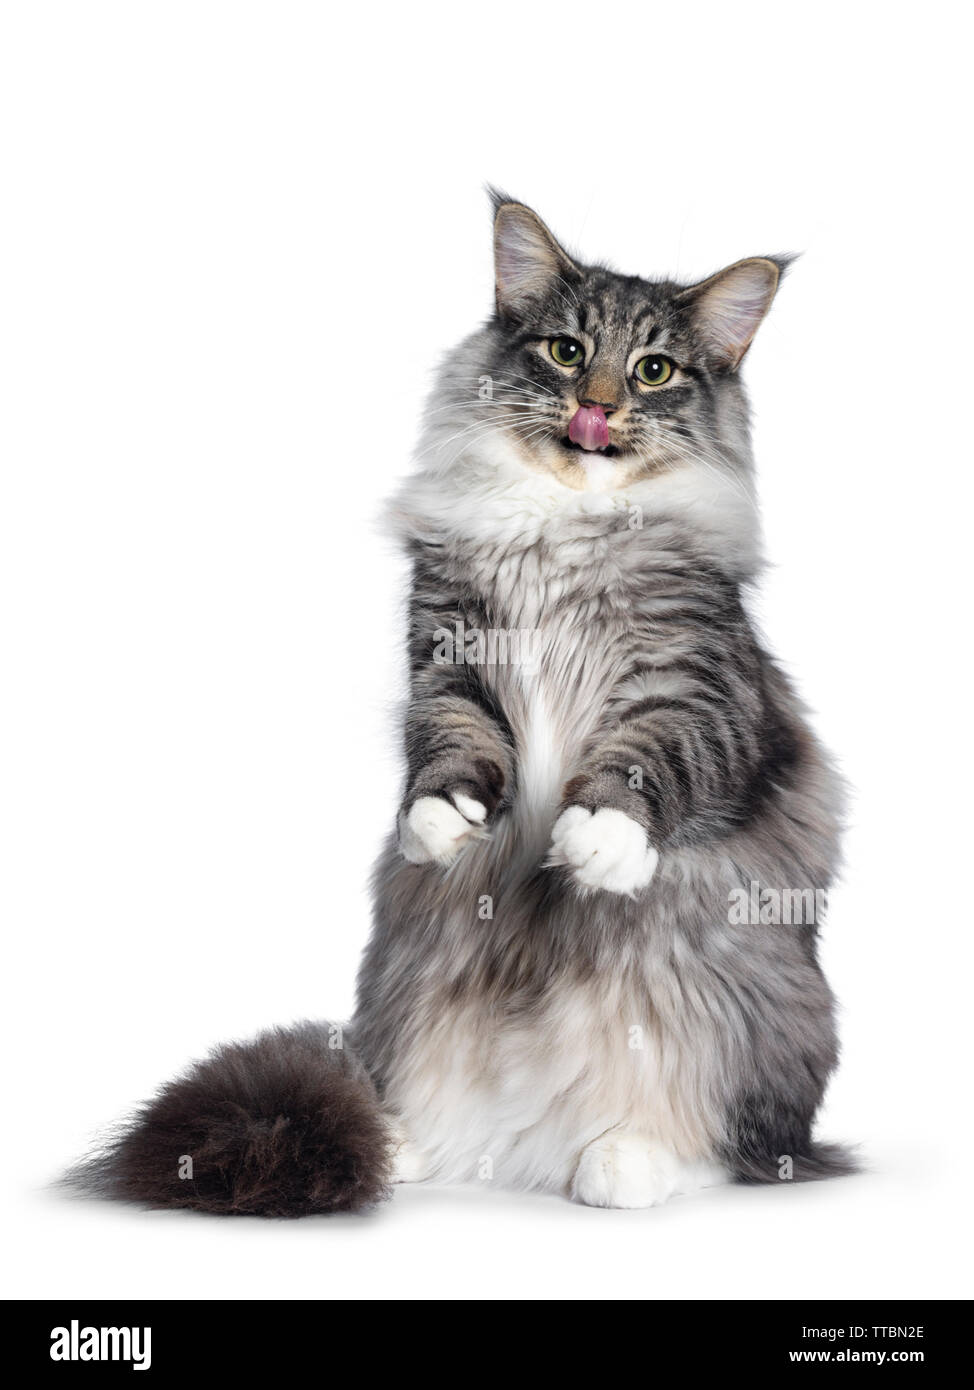 Adorable young Norwegian Forestcat, sitting on hind paws facing front. Looking curious at lens. Isolated on white background. Sticking out tongue. Stock Photo